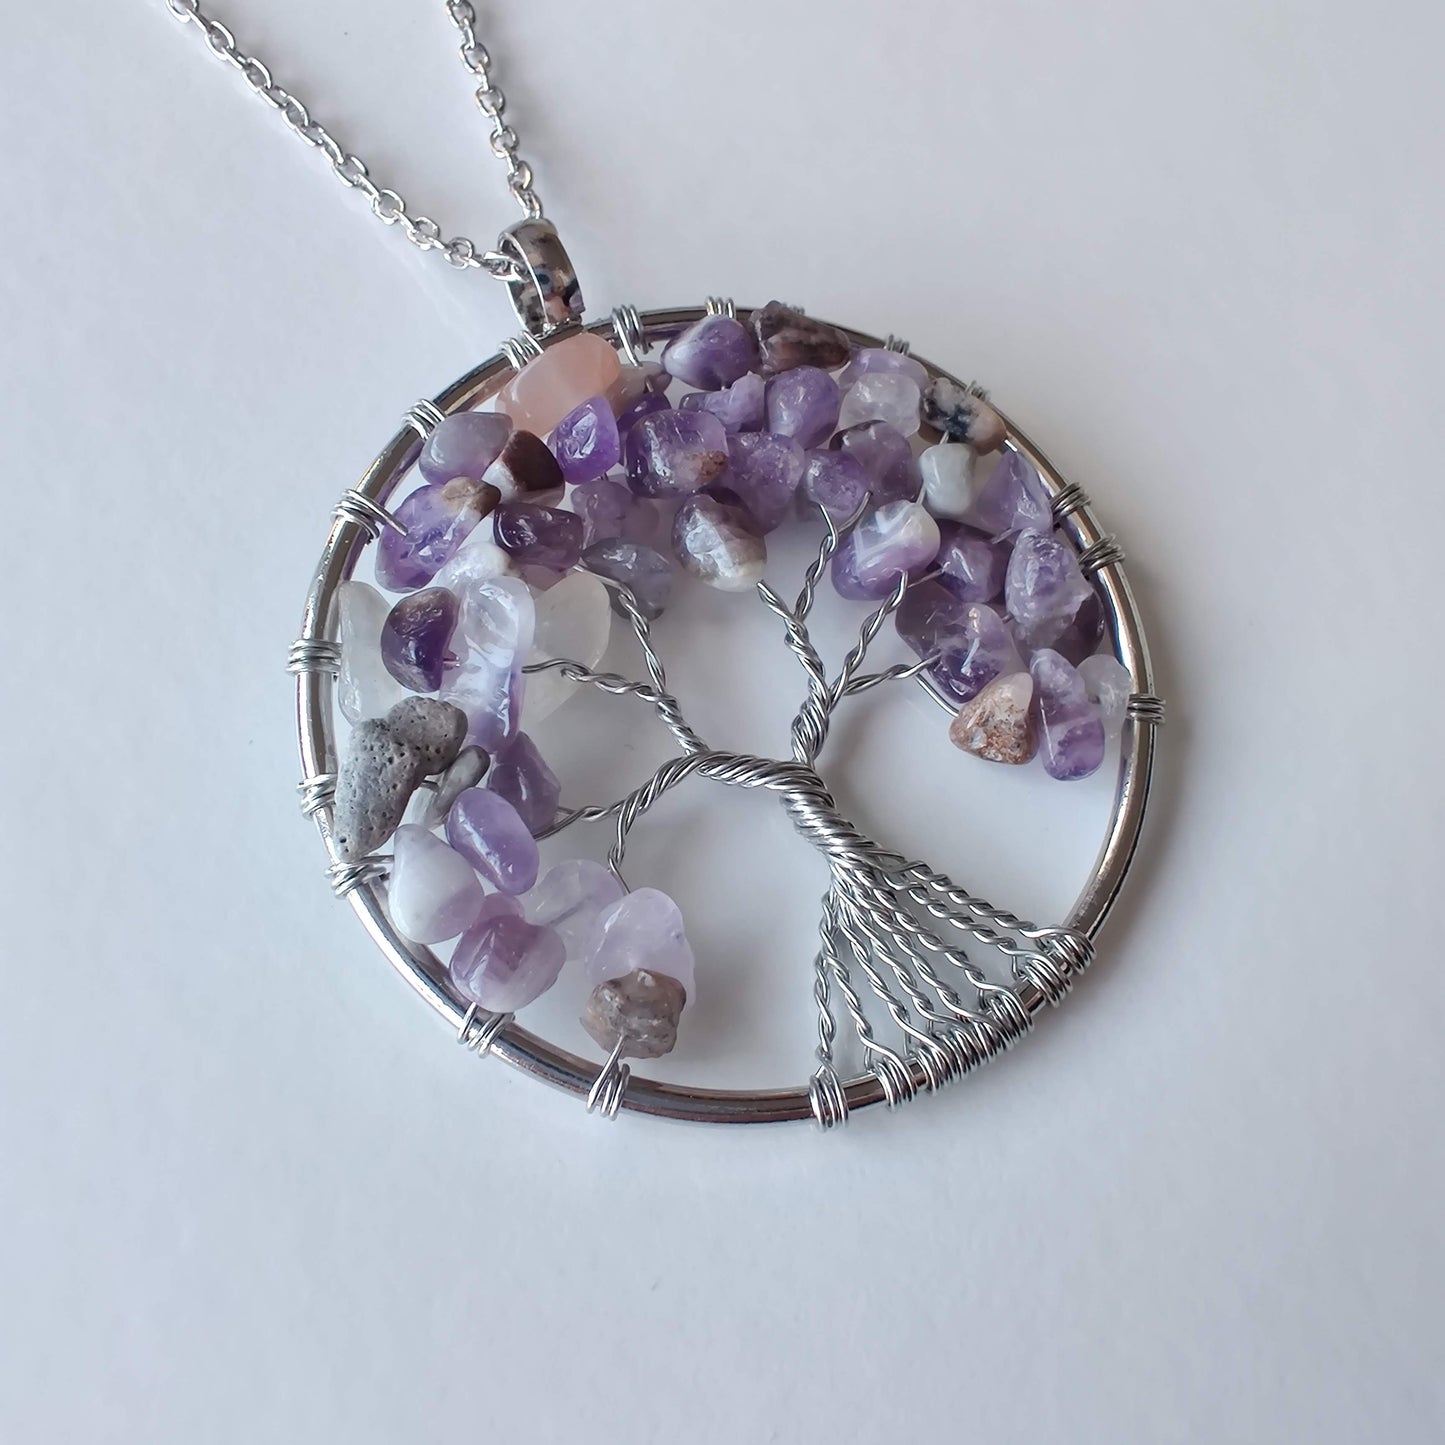 Amethyst Tree of Life Pendant with Silver Chain - Rivendell Shop